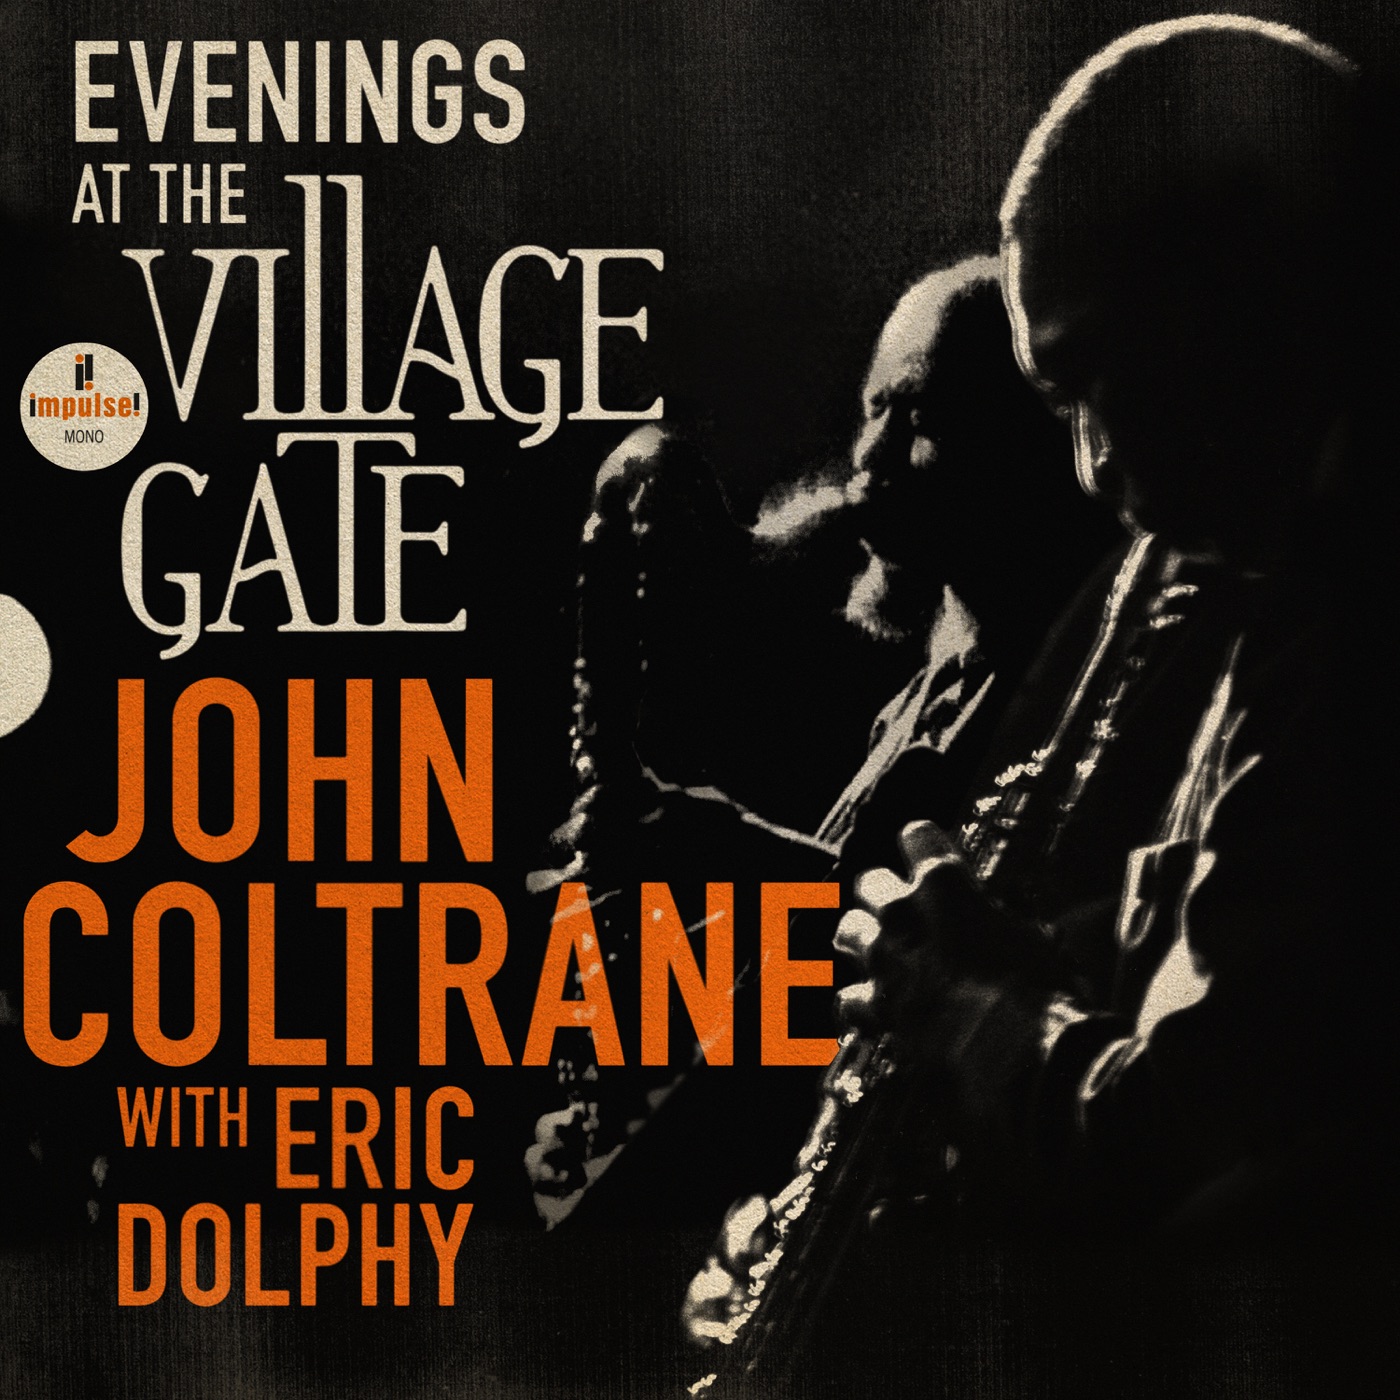 Evenings At The Village Gate: John Coltrane (with Eric Dolphy) by John Coltrane